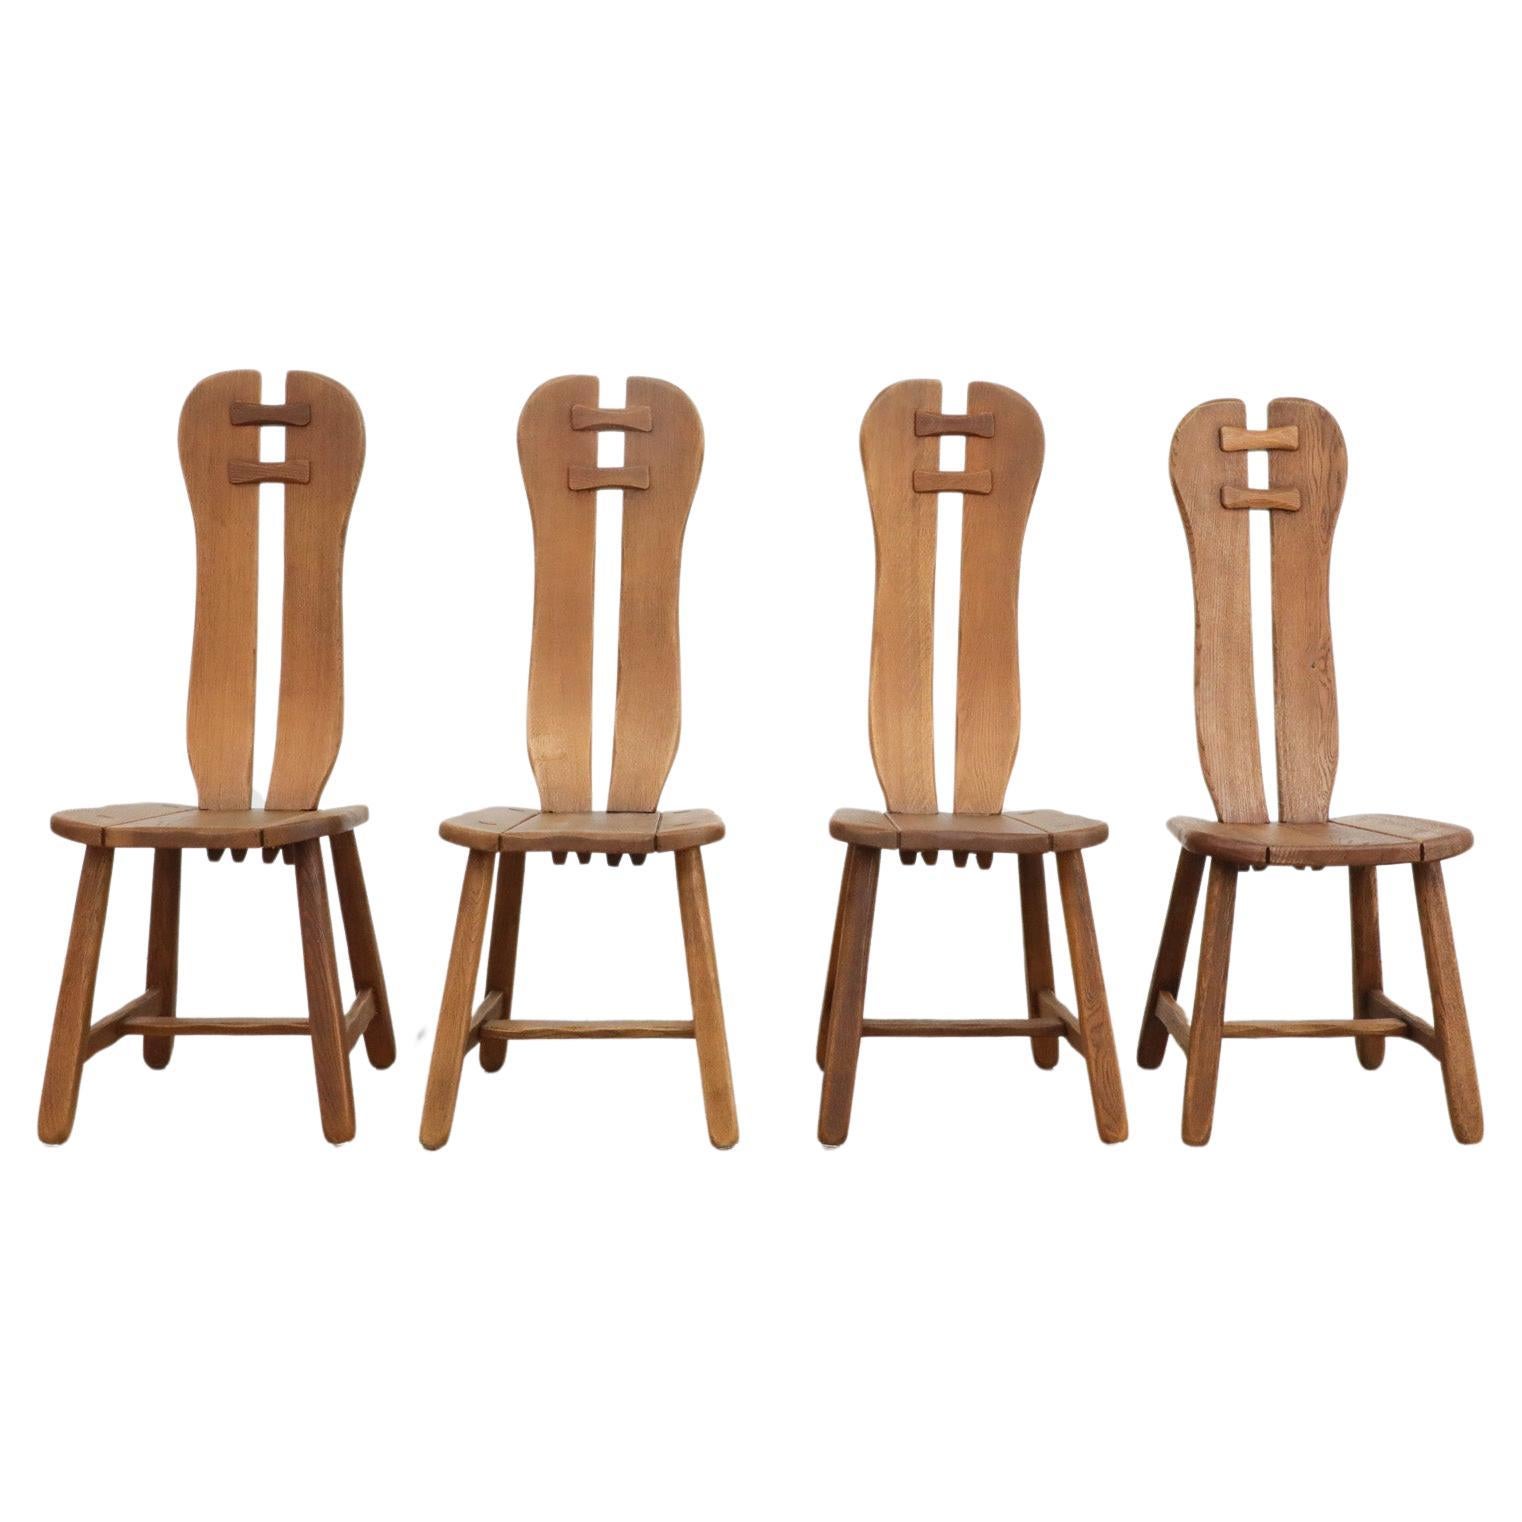 Mid-Century High Back Brutalist Dining Chairs by  DePuydt